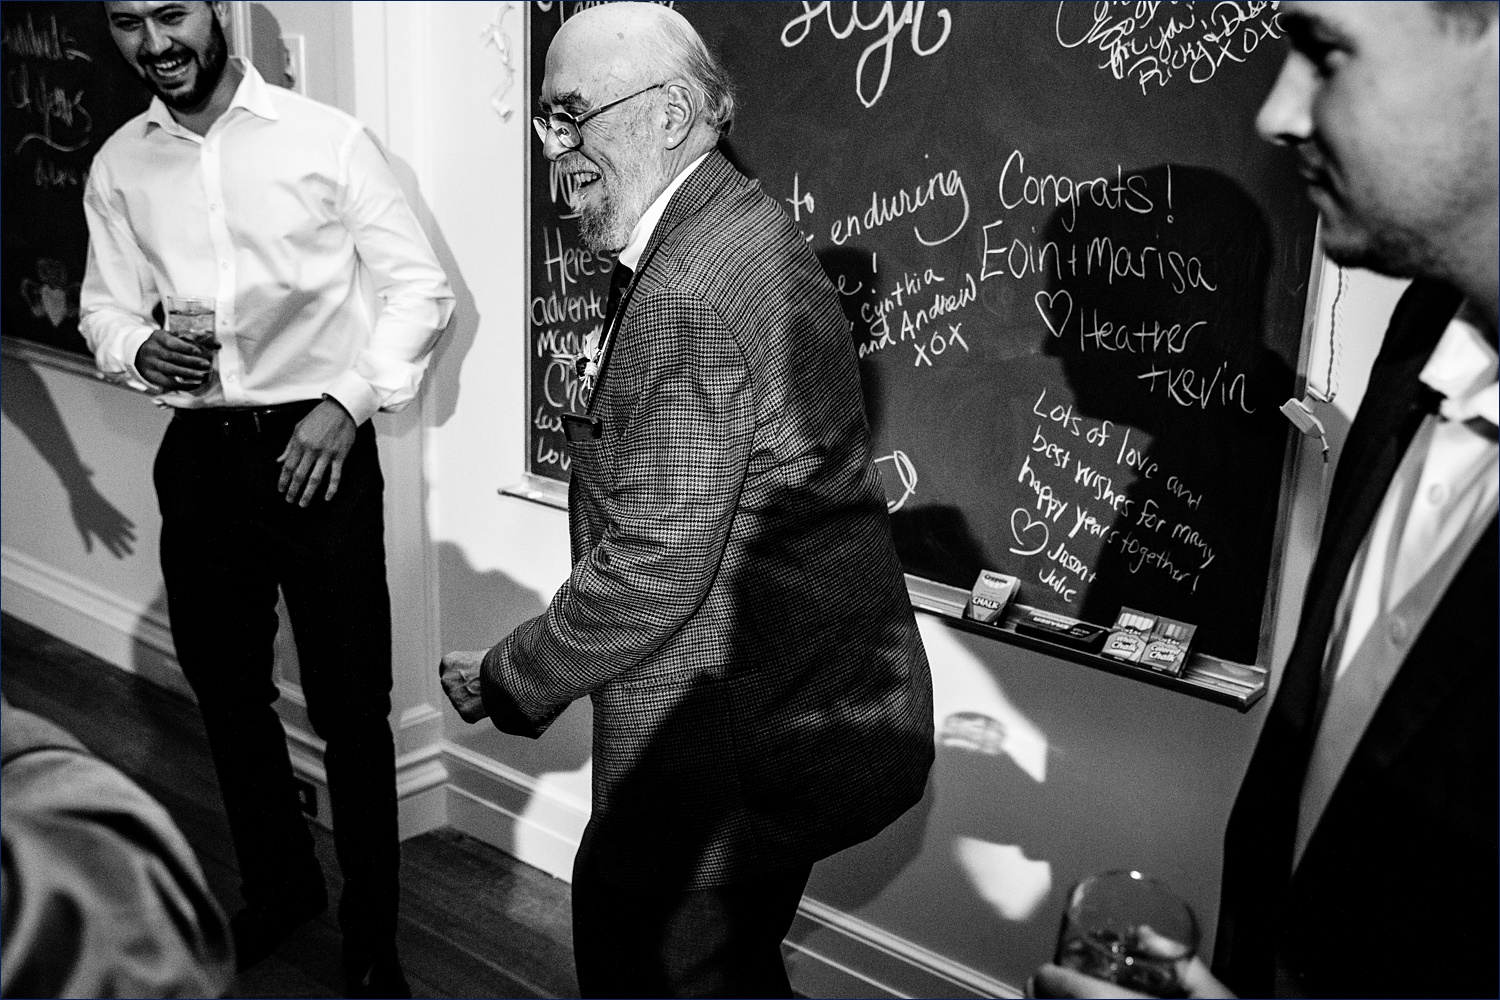 Father of the bride dances at the wedding reception